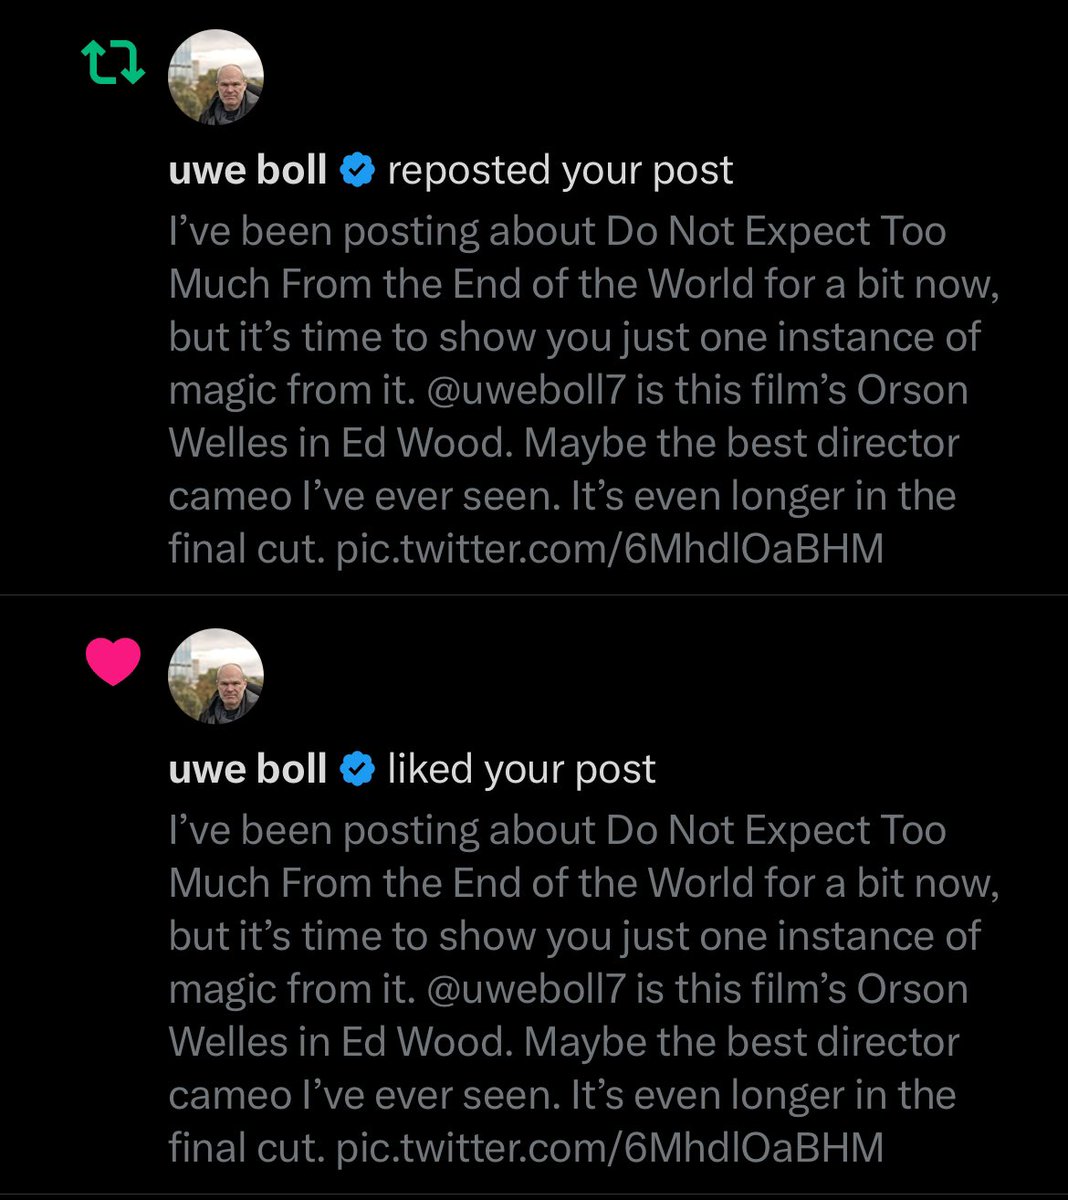 Getting noticed by Jim Cummings and Uwe Boll in the same week tells me I’m doing something right.